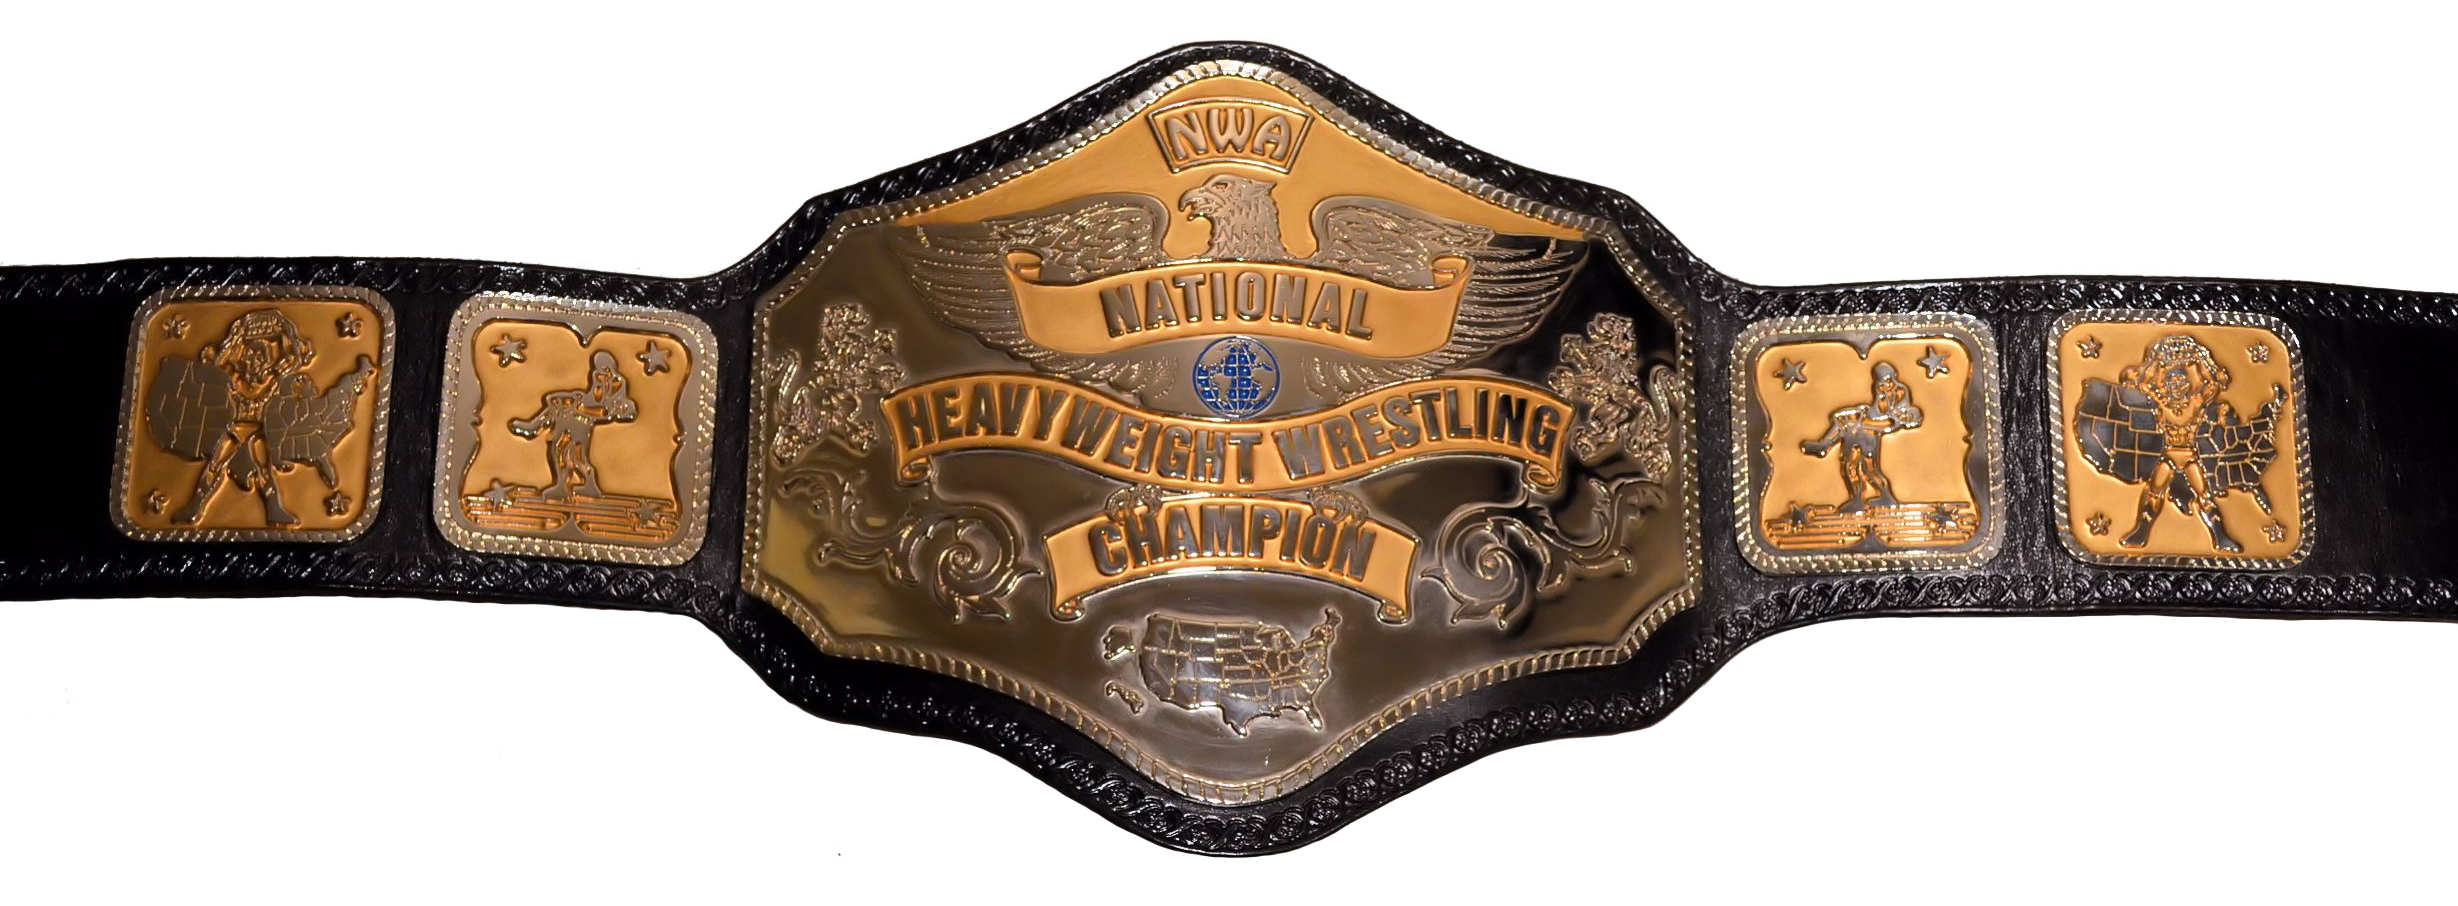 Image result for nwa national heavyweight championship